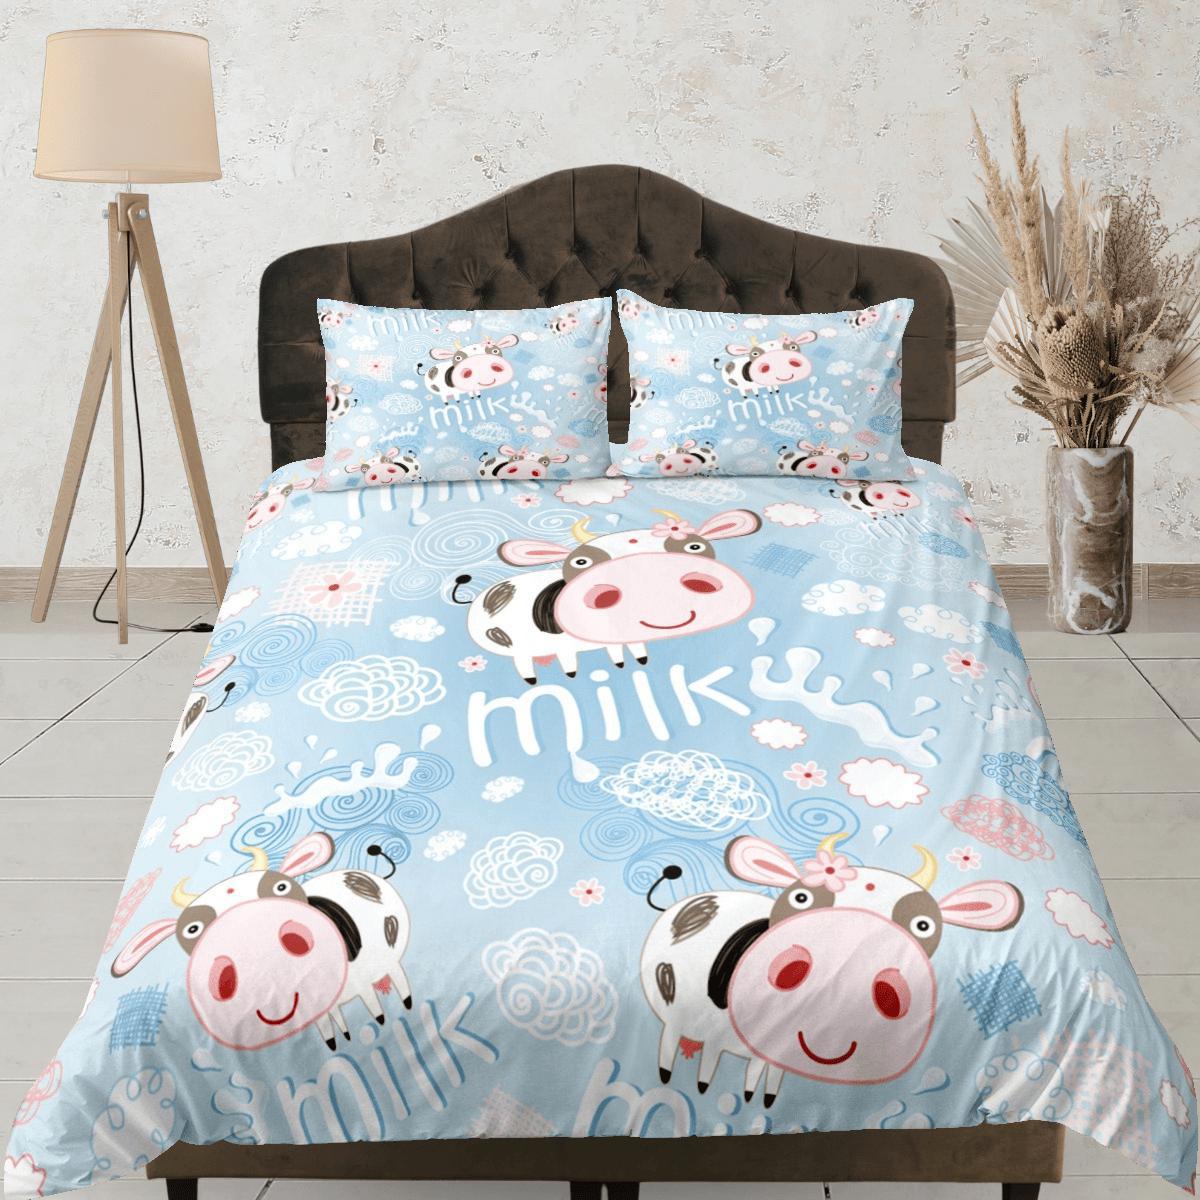 daintyduvet Funny Cow Blue Duvet Cover Set Colorful Bedspread, Kids Full Bedding Set with Pillowcase, Comforter Cover Twin